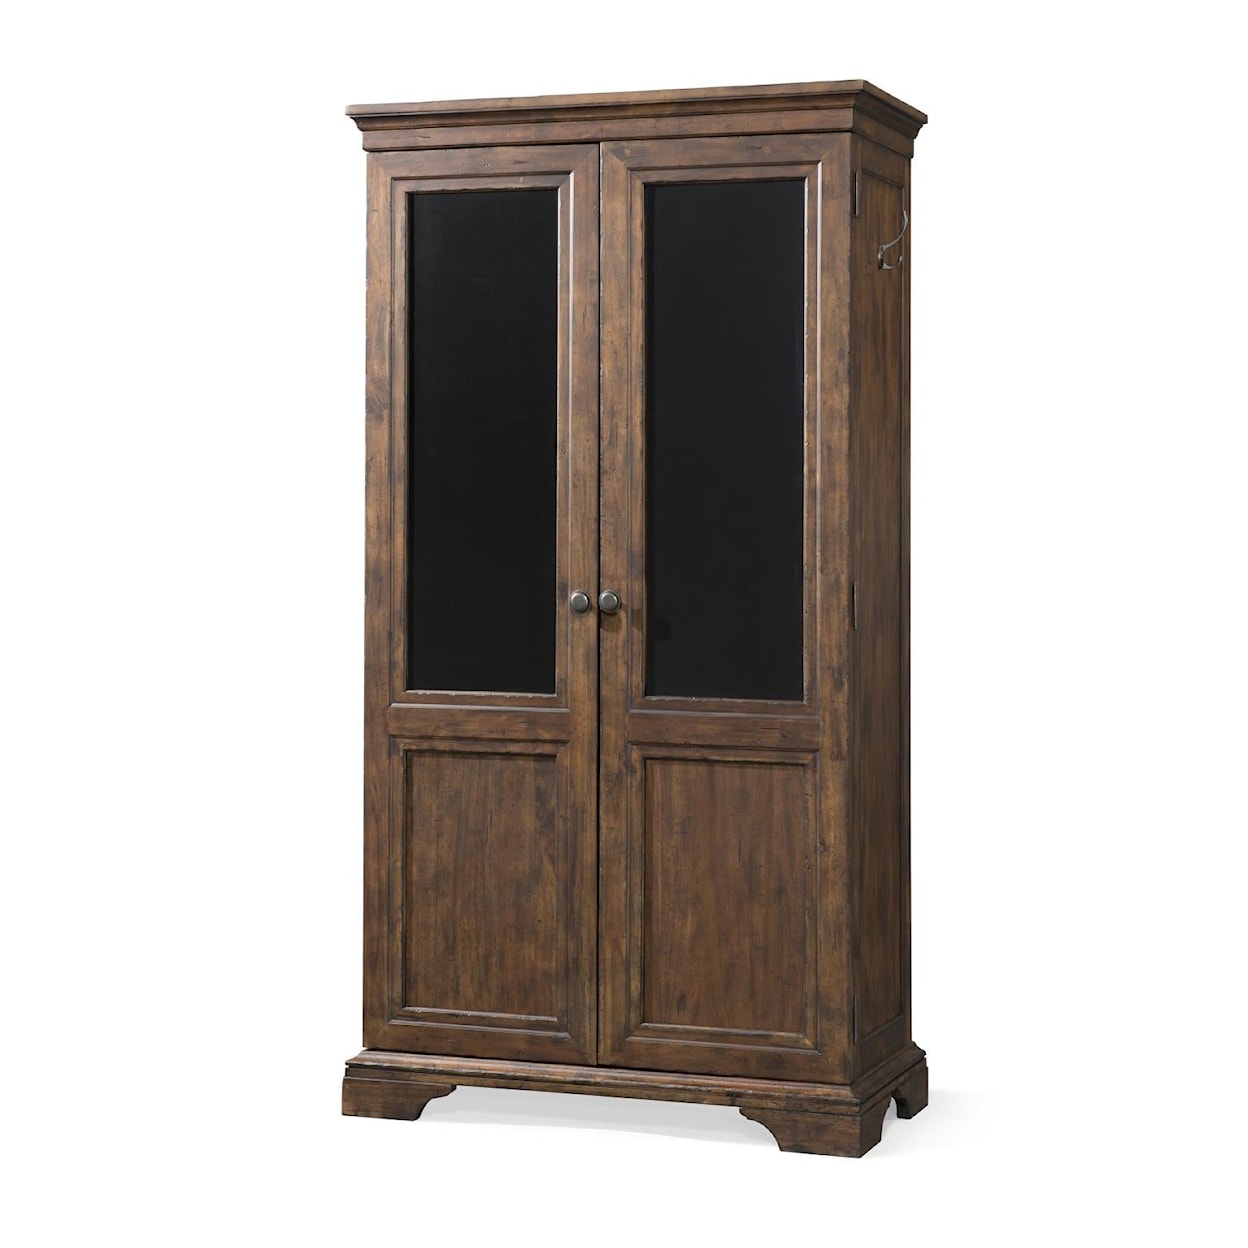 Trisha Yearwood Home Collection by Legacy Classic Trisha Yearwood Home Storage Cabinet